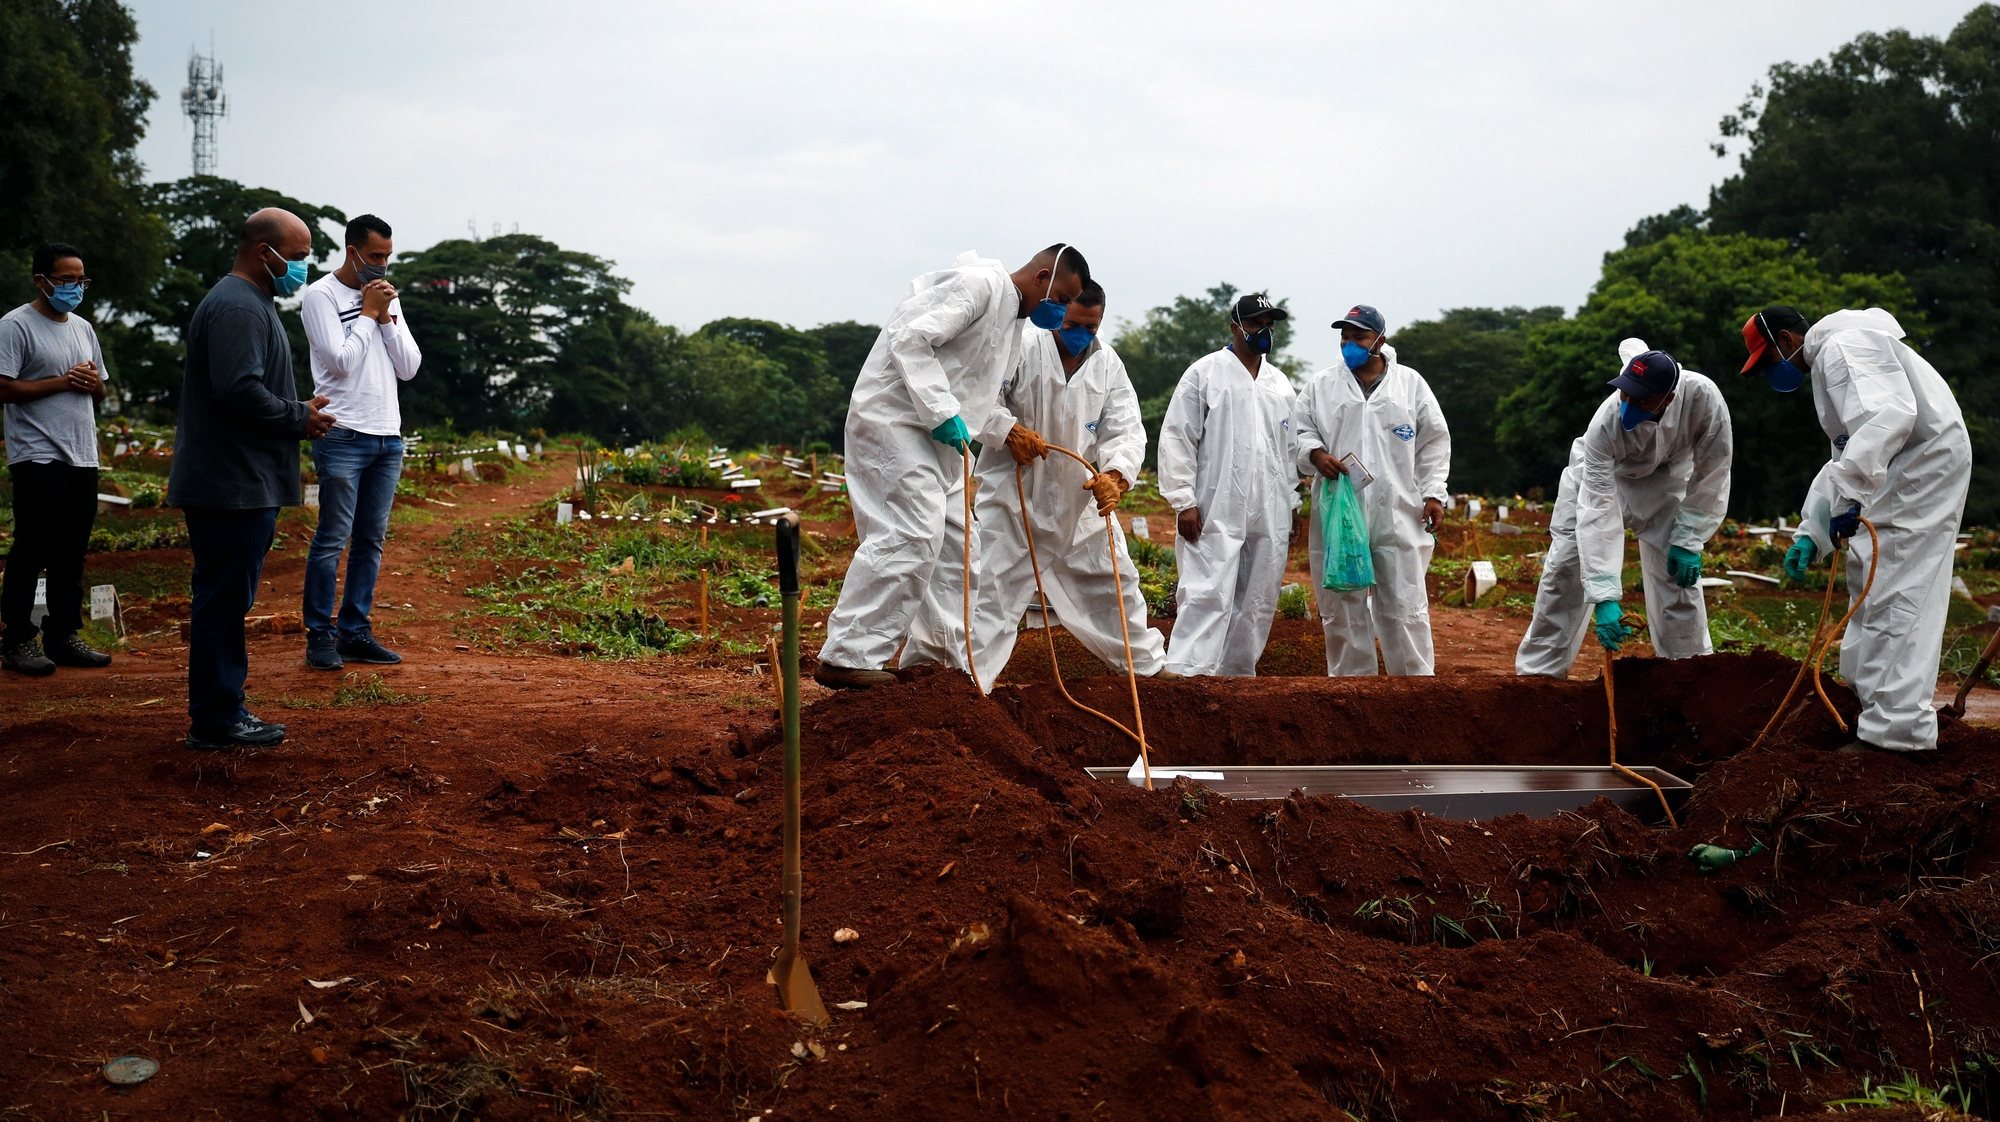 epa09081869 Workers bury a Covid-19 victim at the Viola Formosa Cemetery in Sao Paulo, Brazil, 18 March 2021. Brazil registered a new daily record of 90,303 Covid-19 infections on 17 March 2021 adding to the more than 11.6 million cases. Deaths were also high in the last 24 hours, with 2,648 deaths from the virus, the second highest figure after the record 2,841 deaths registered on 16 March bringing Brazil to close to 285,000 victims, according to the bulletin released by the Ministry Health.  EPA/Fernando Bizerra Jr